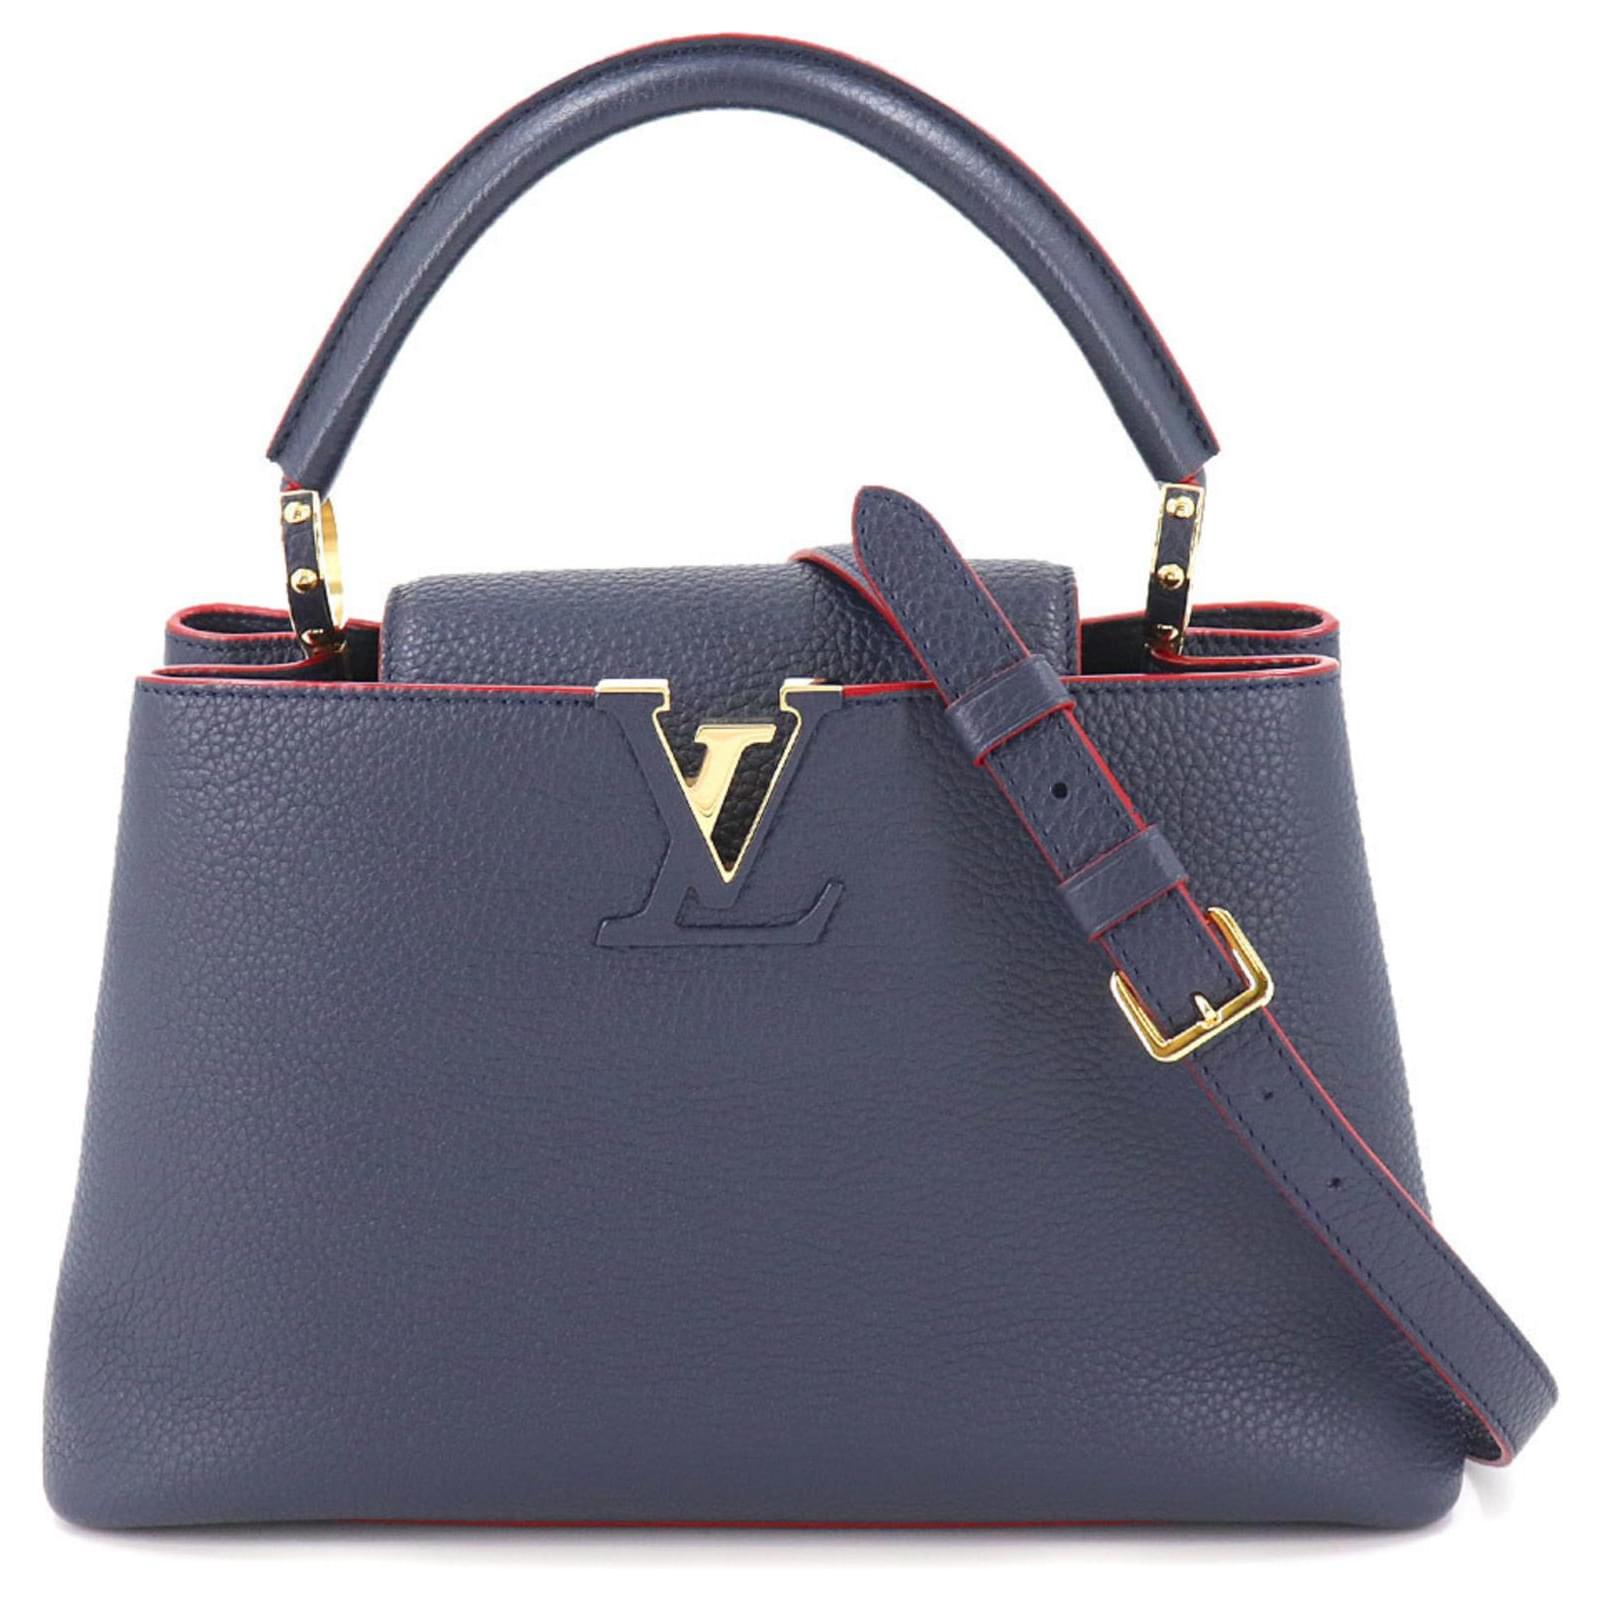 Louis Vuitton Capucines BB handbag with strap in Navy Blue leather